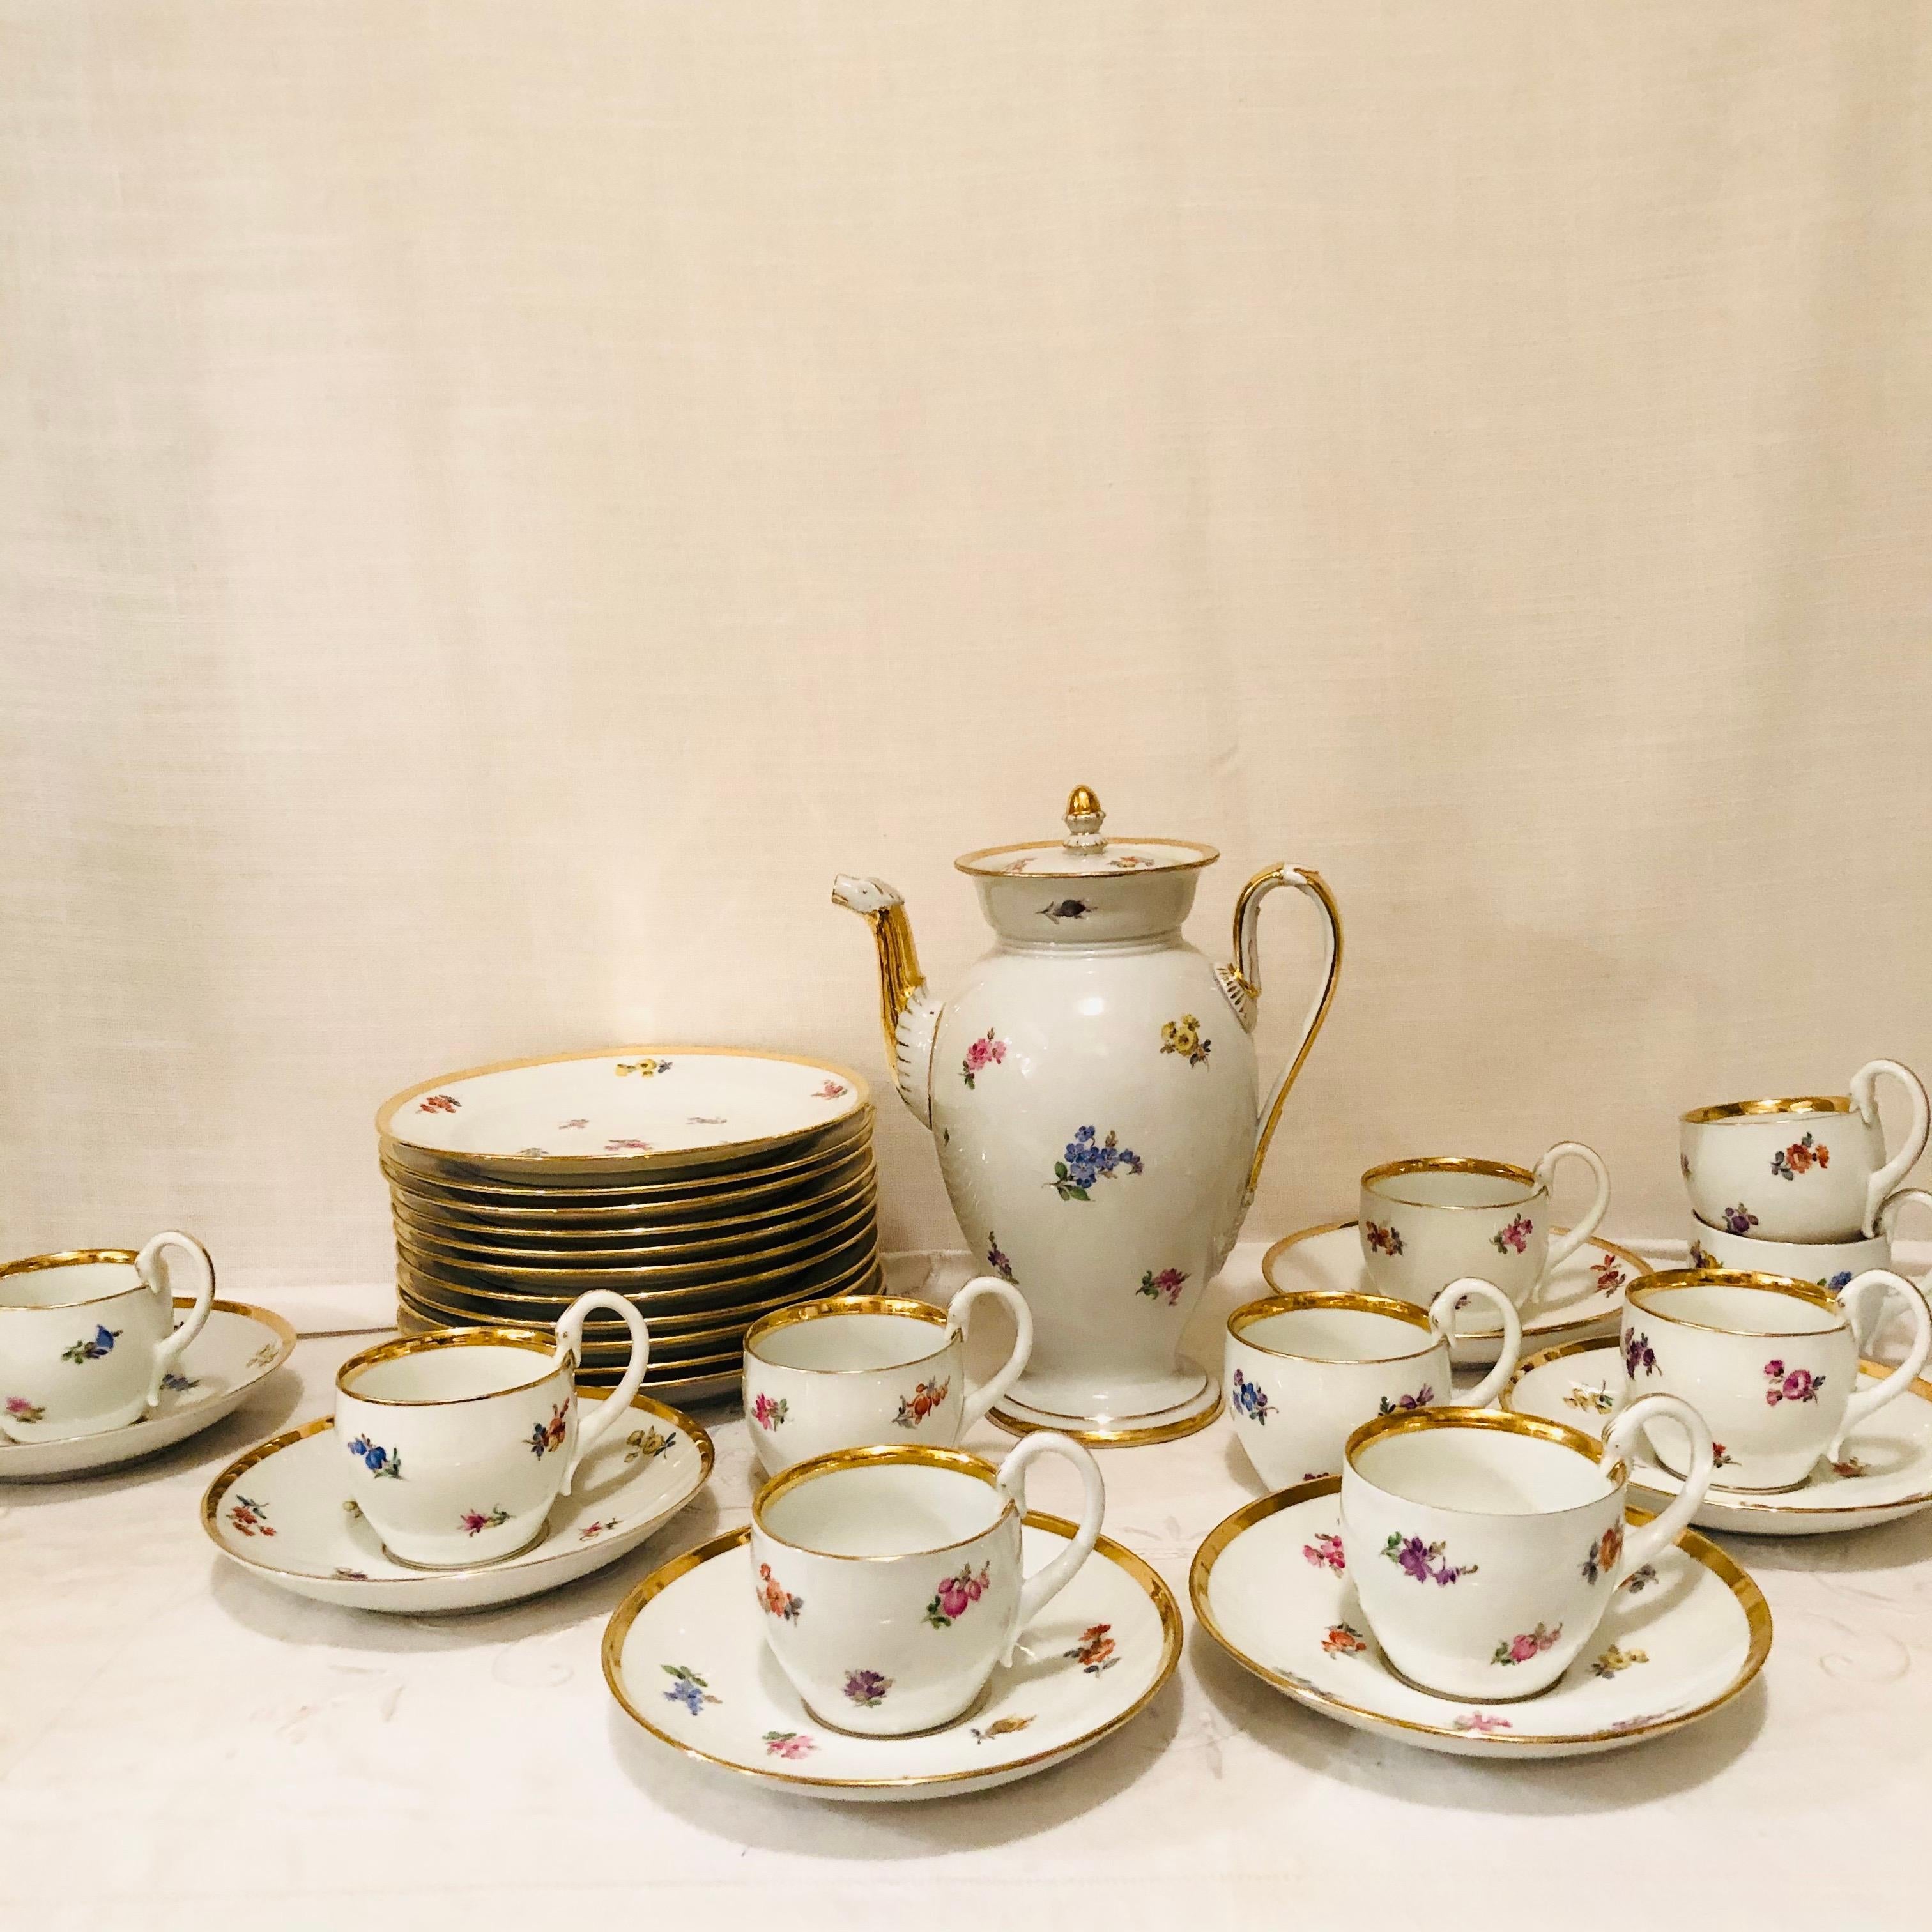 Meissen Streublumen Tea Set for 10 with Cups and Saucers, Cake Plates and Teapot 2